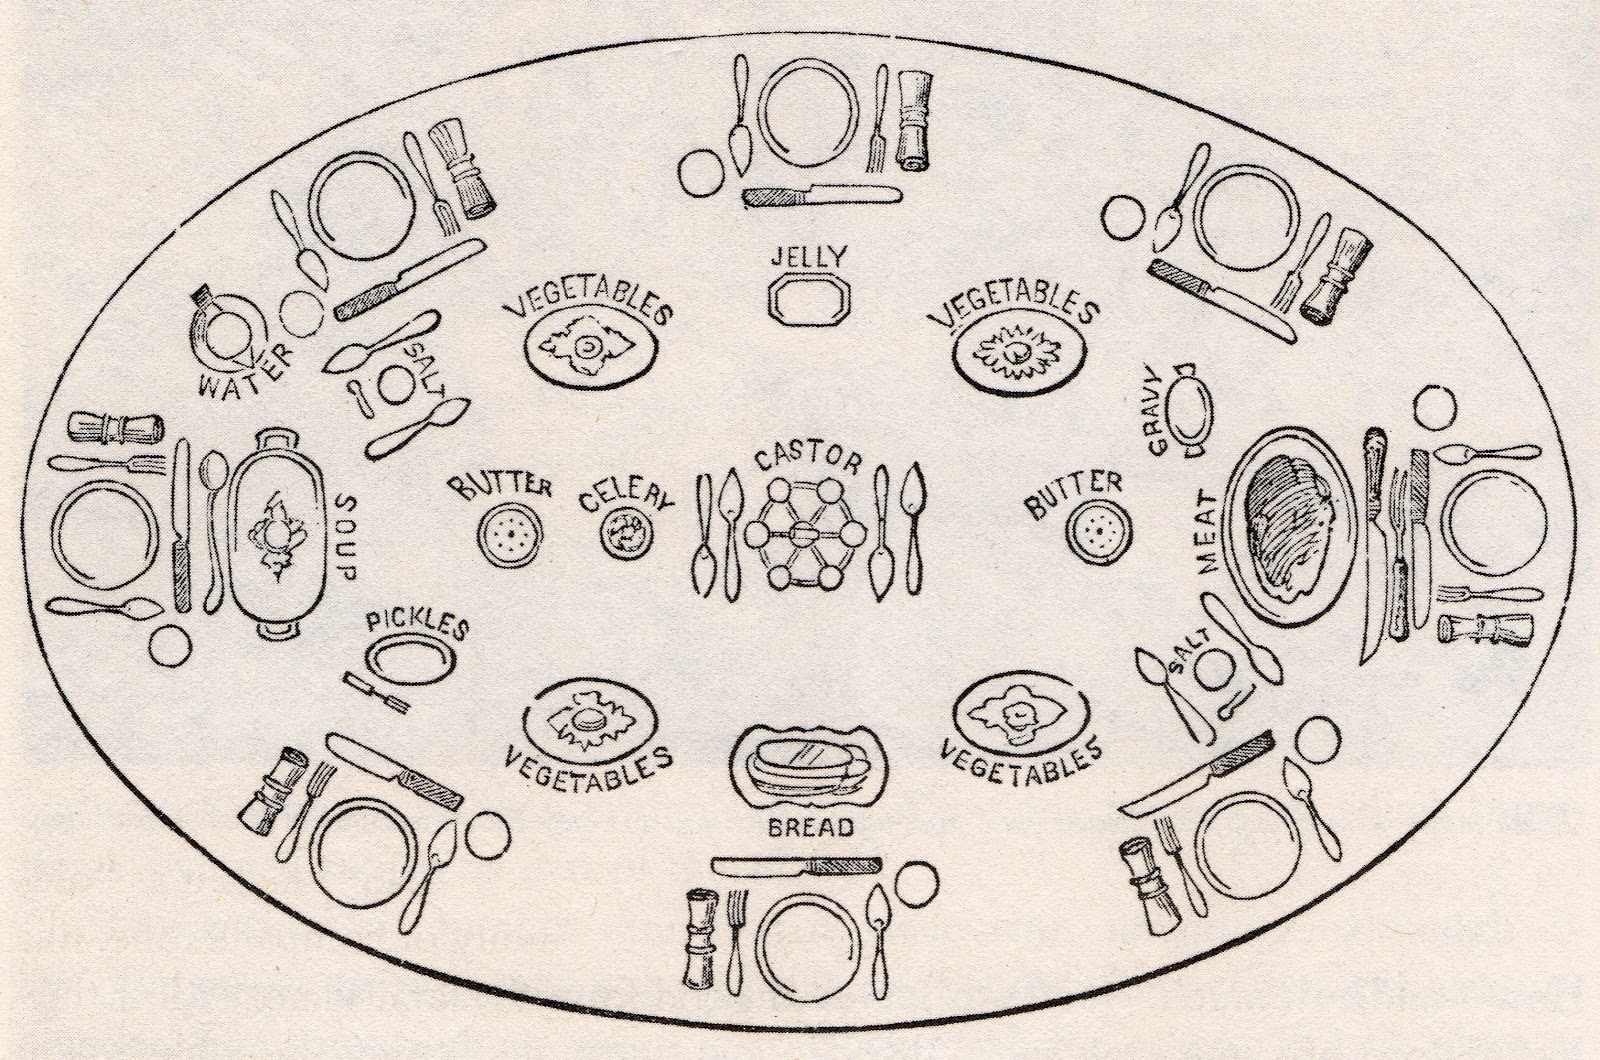 table setting diagram placemat